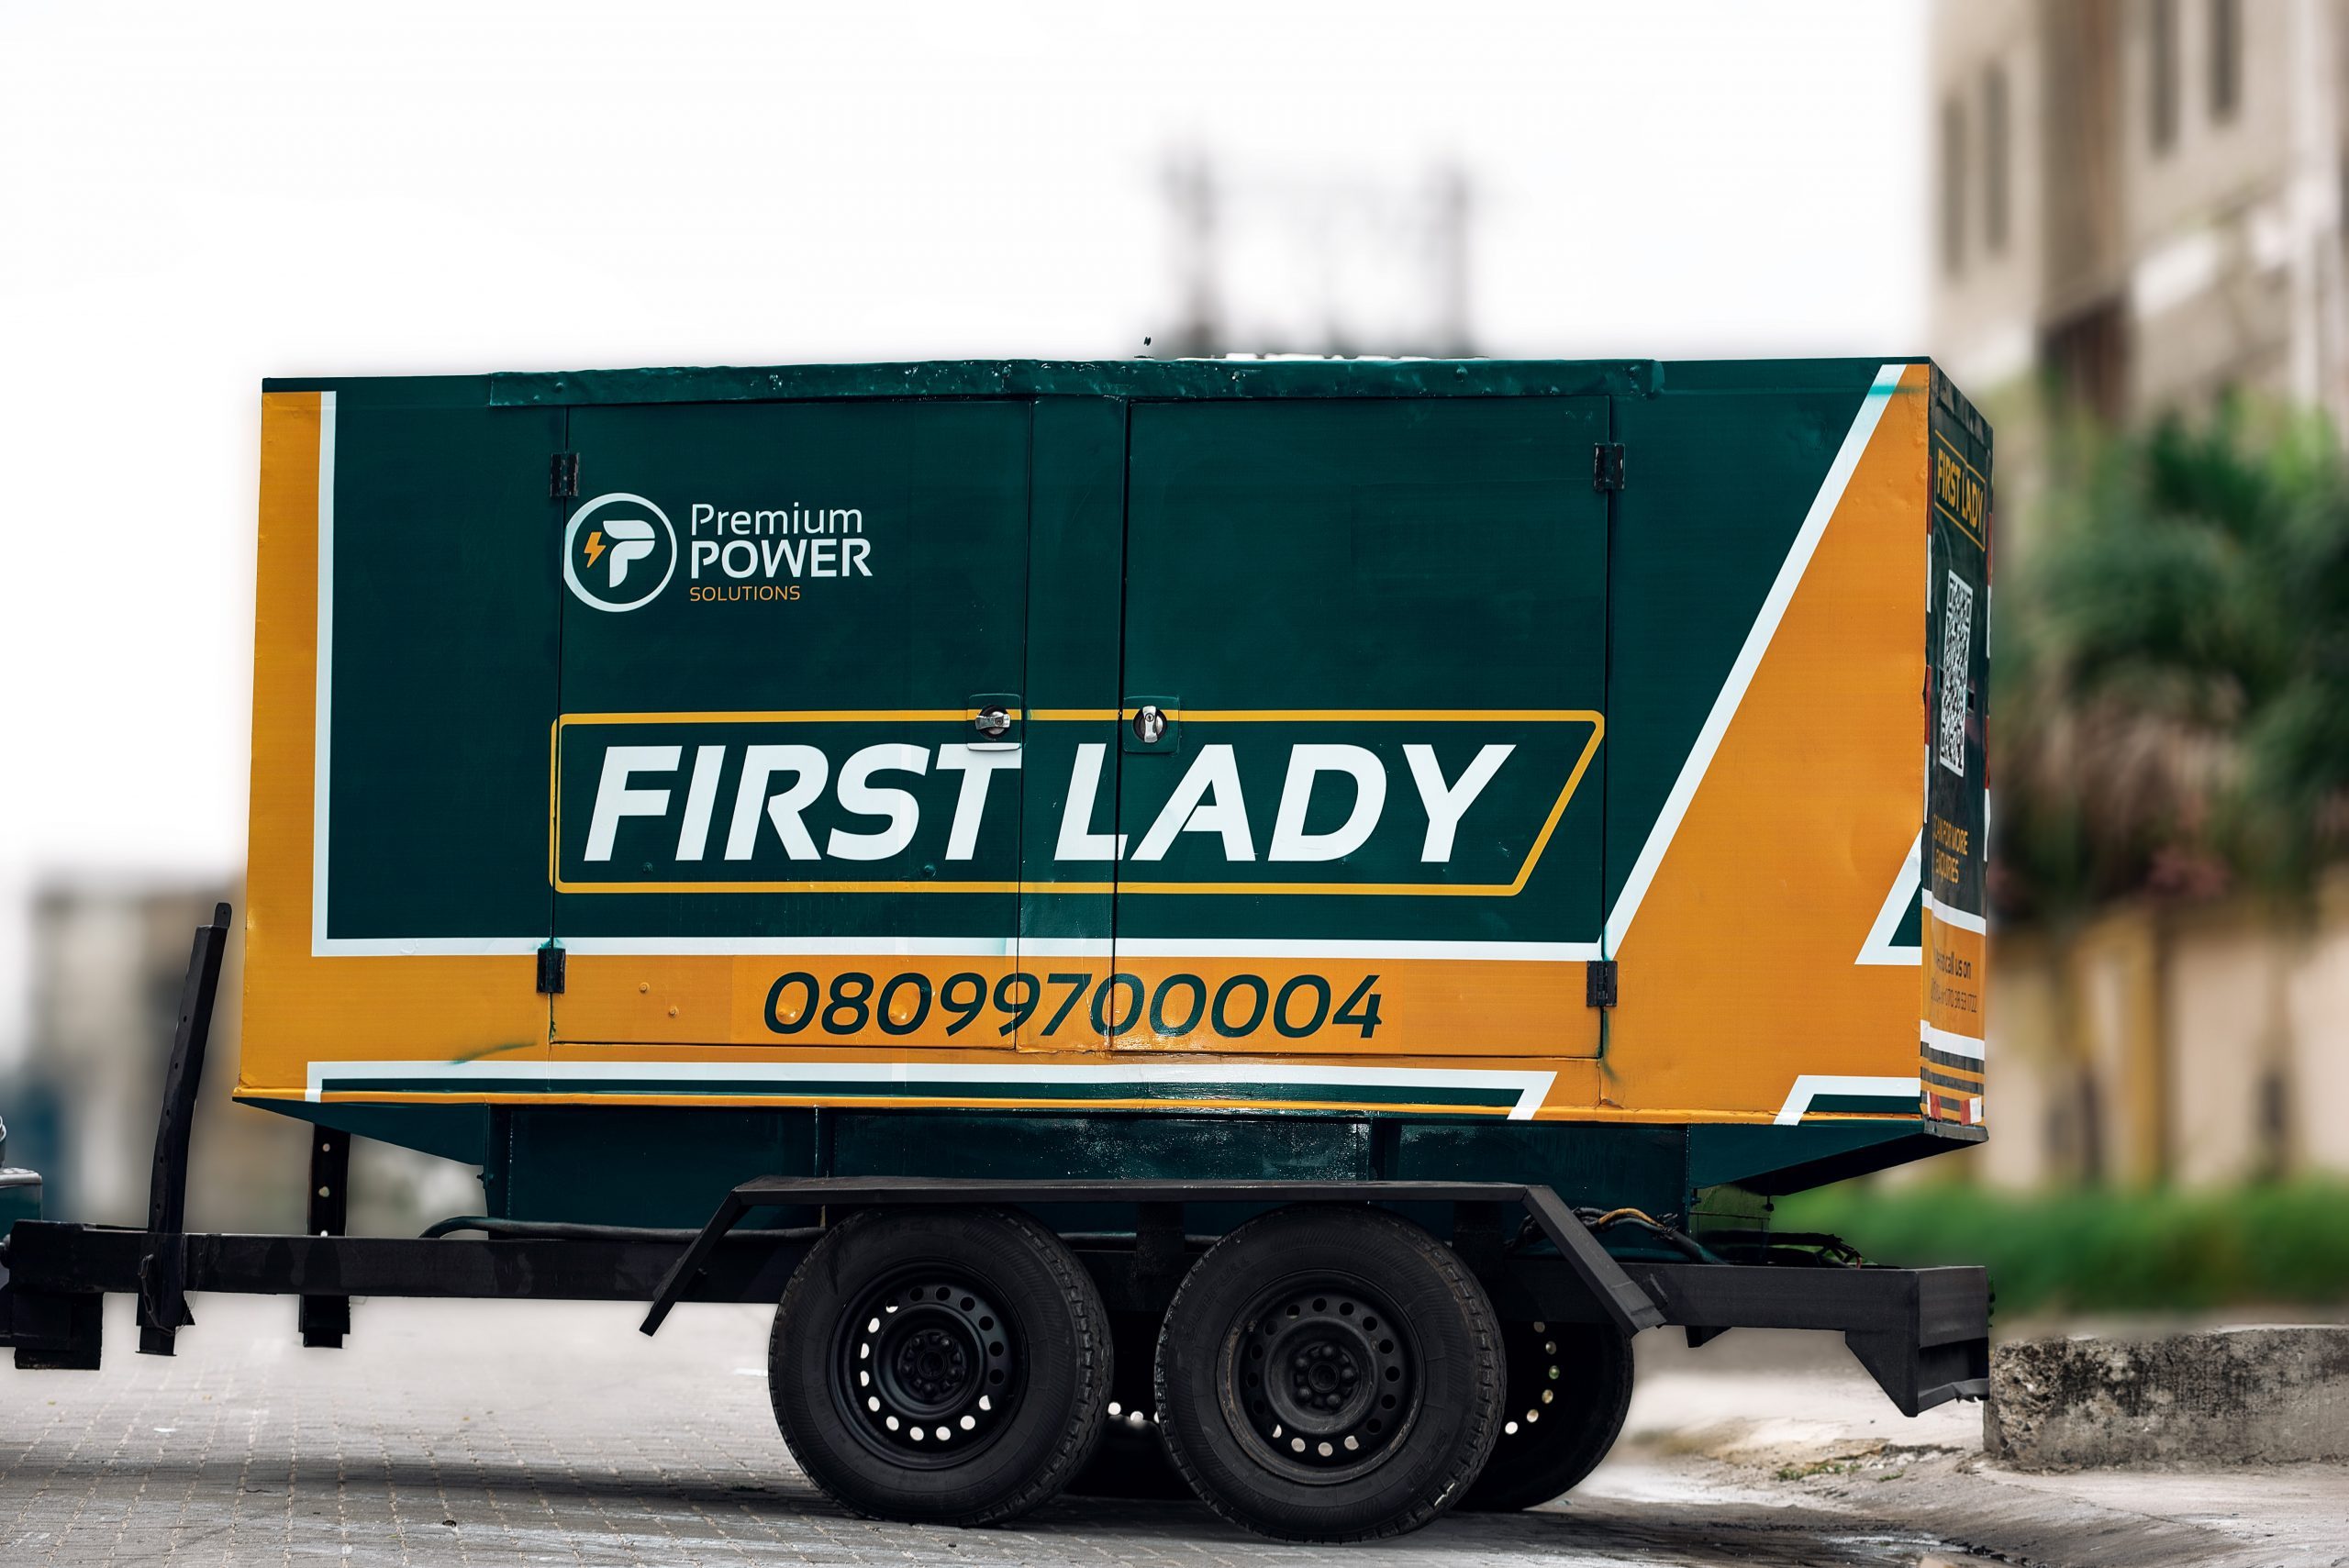 First lady soundproof generator